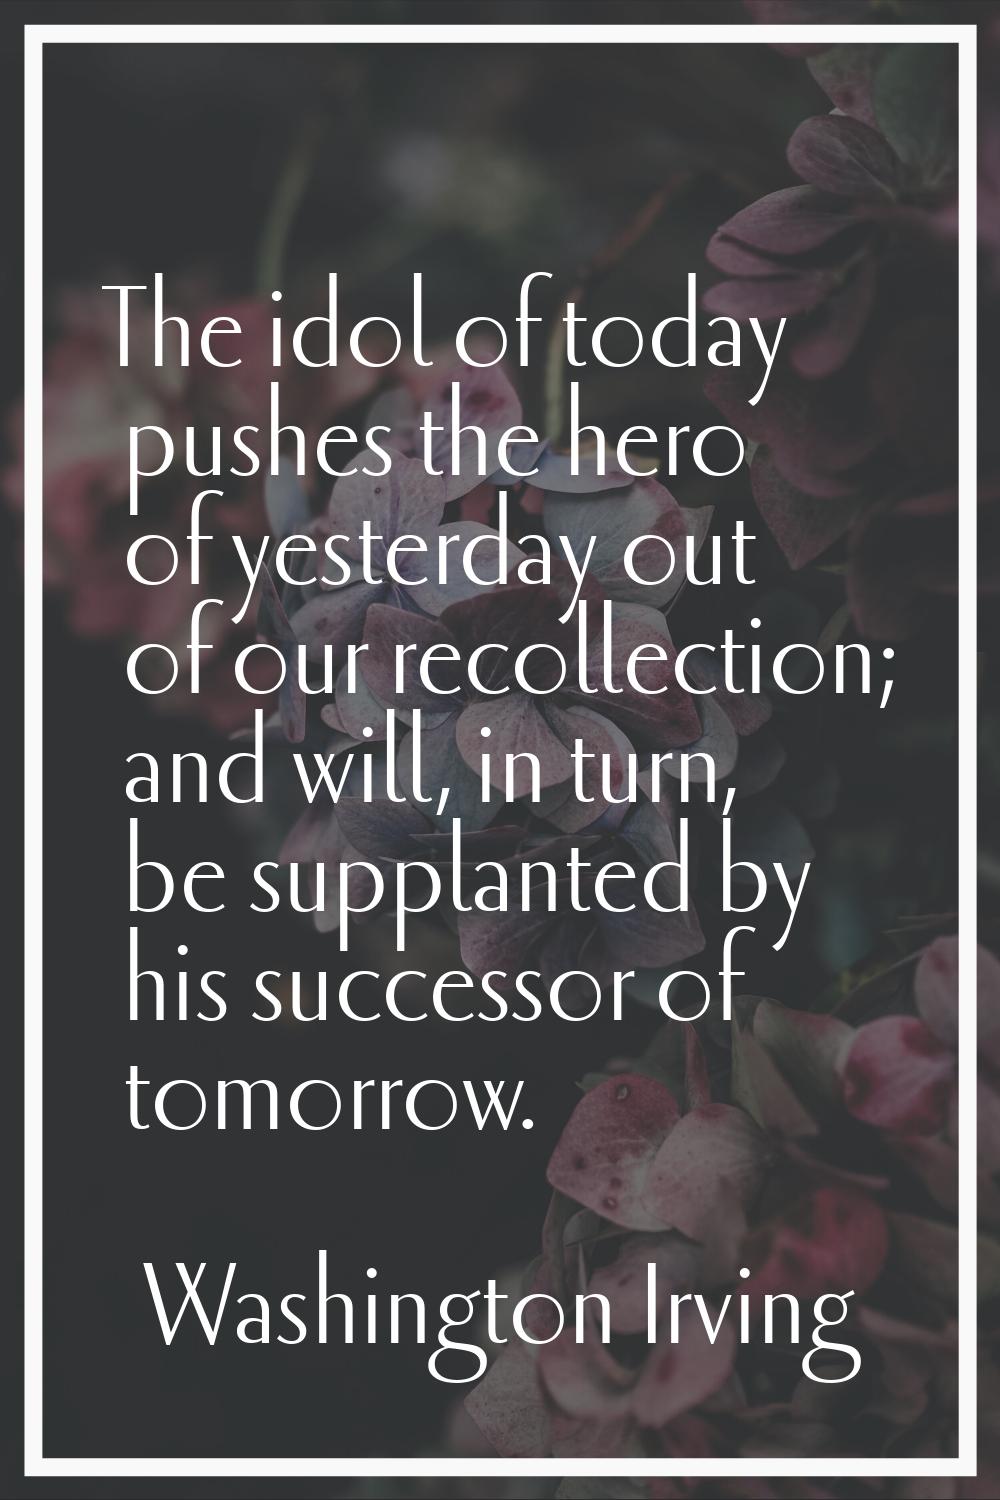 The idol of today pushes the hero of yesterday out of our recollection; and will, in turn, be suppl